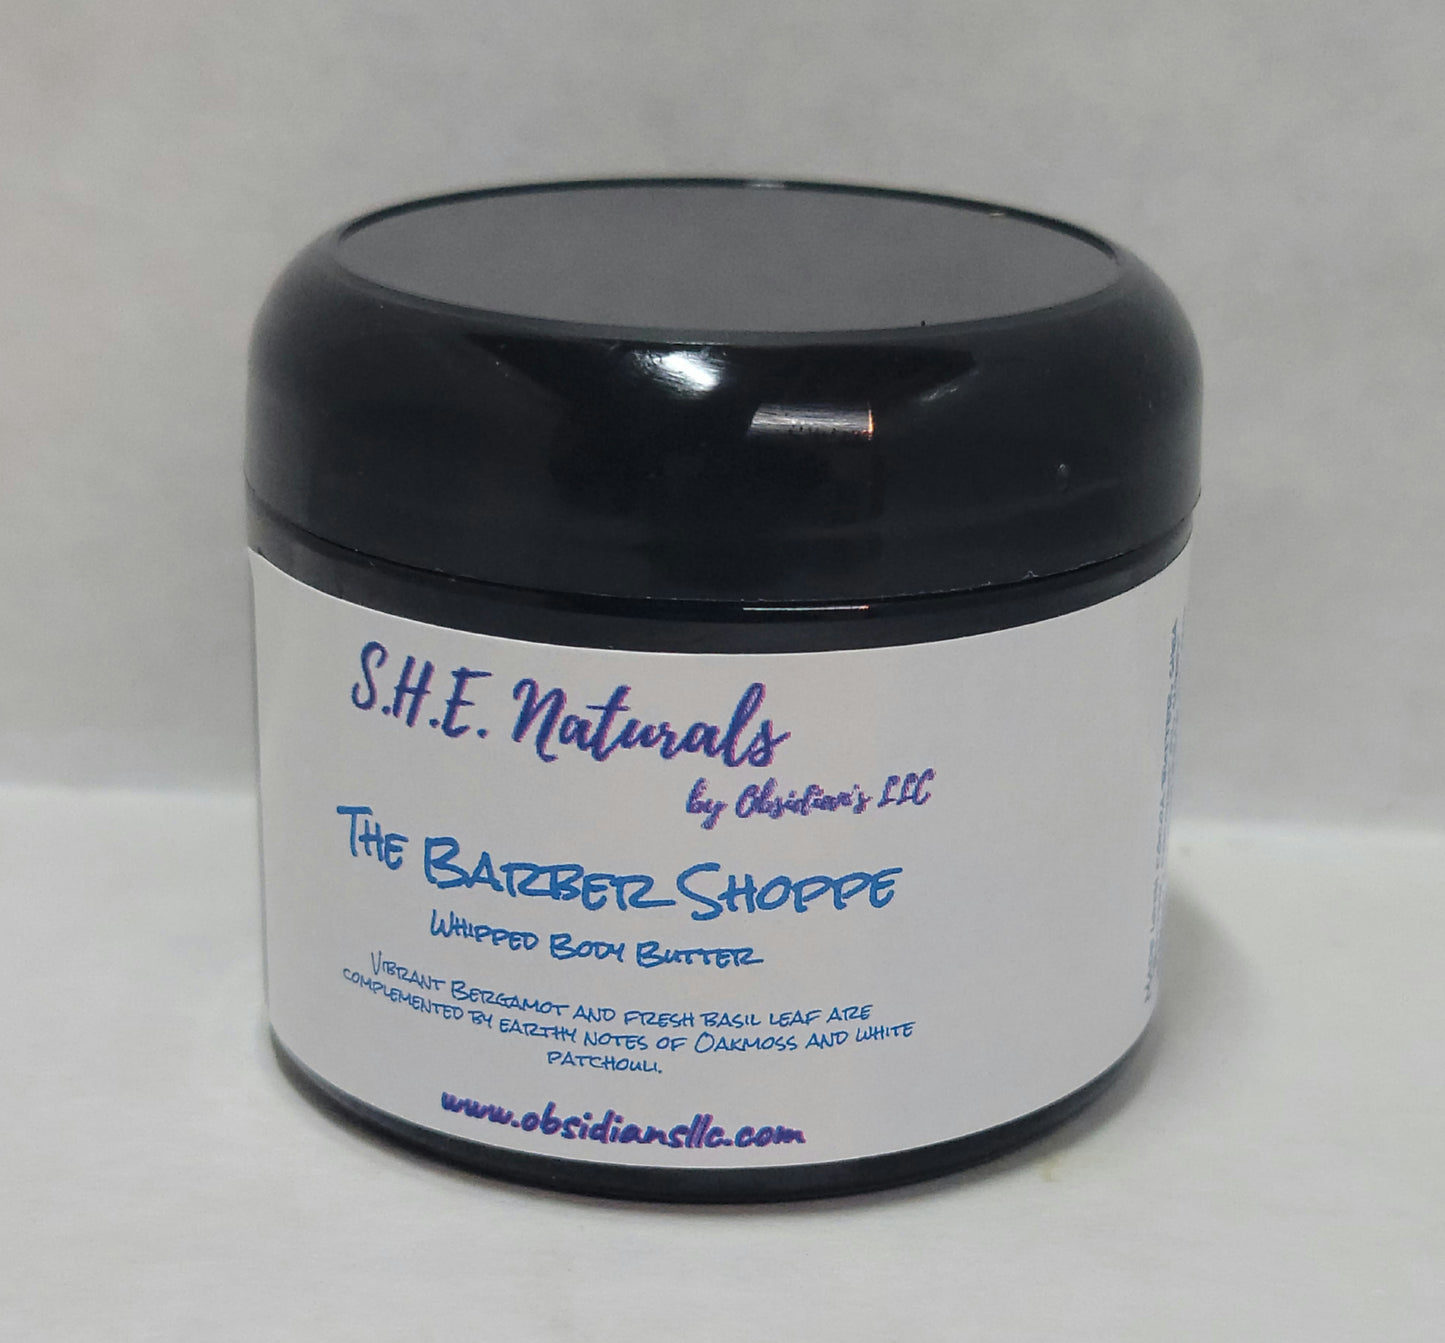 The Barber Shoppe Whipped Body Butter